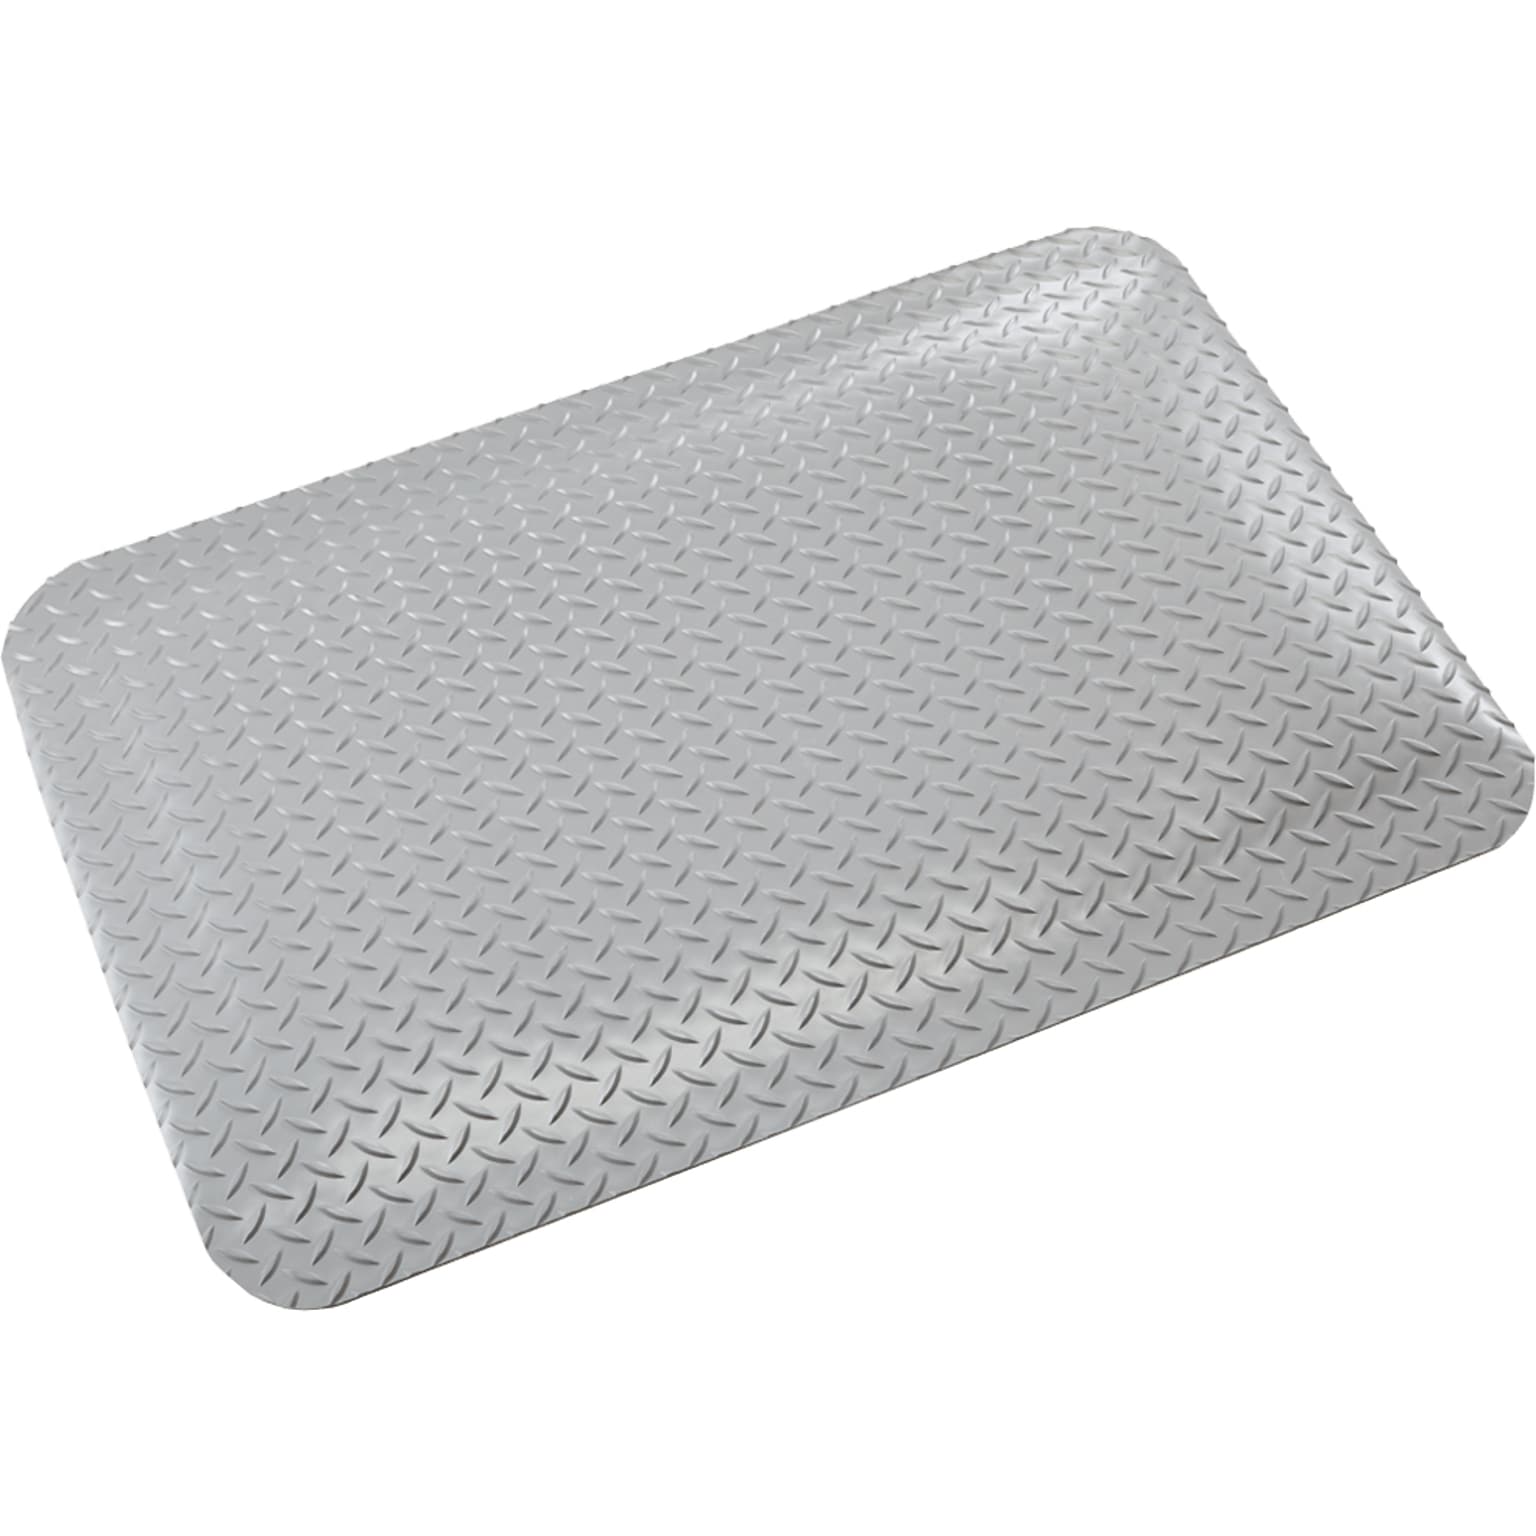 Crown Mats Workers-Delight Deck Plate Supreme Anti-Fatigue Mat, 24 x 36, Gray (WD 1223GY)